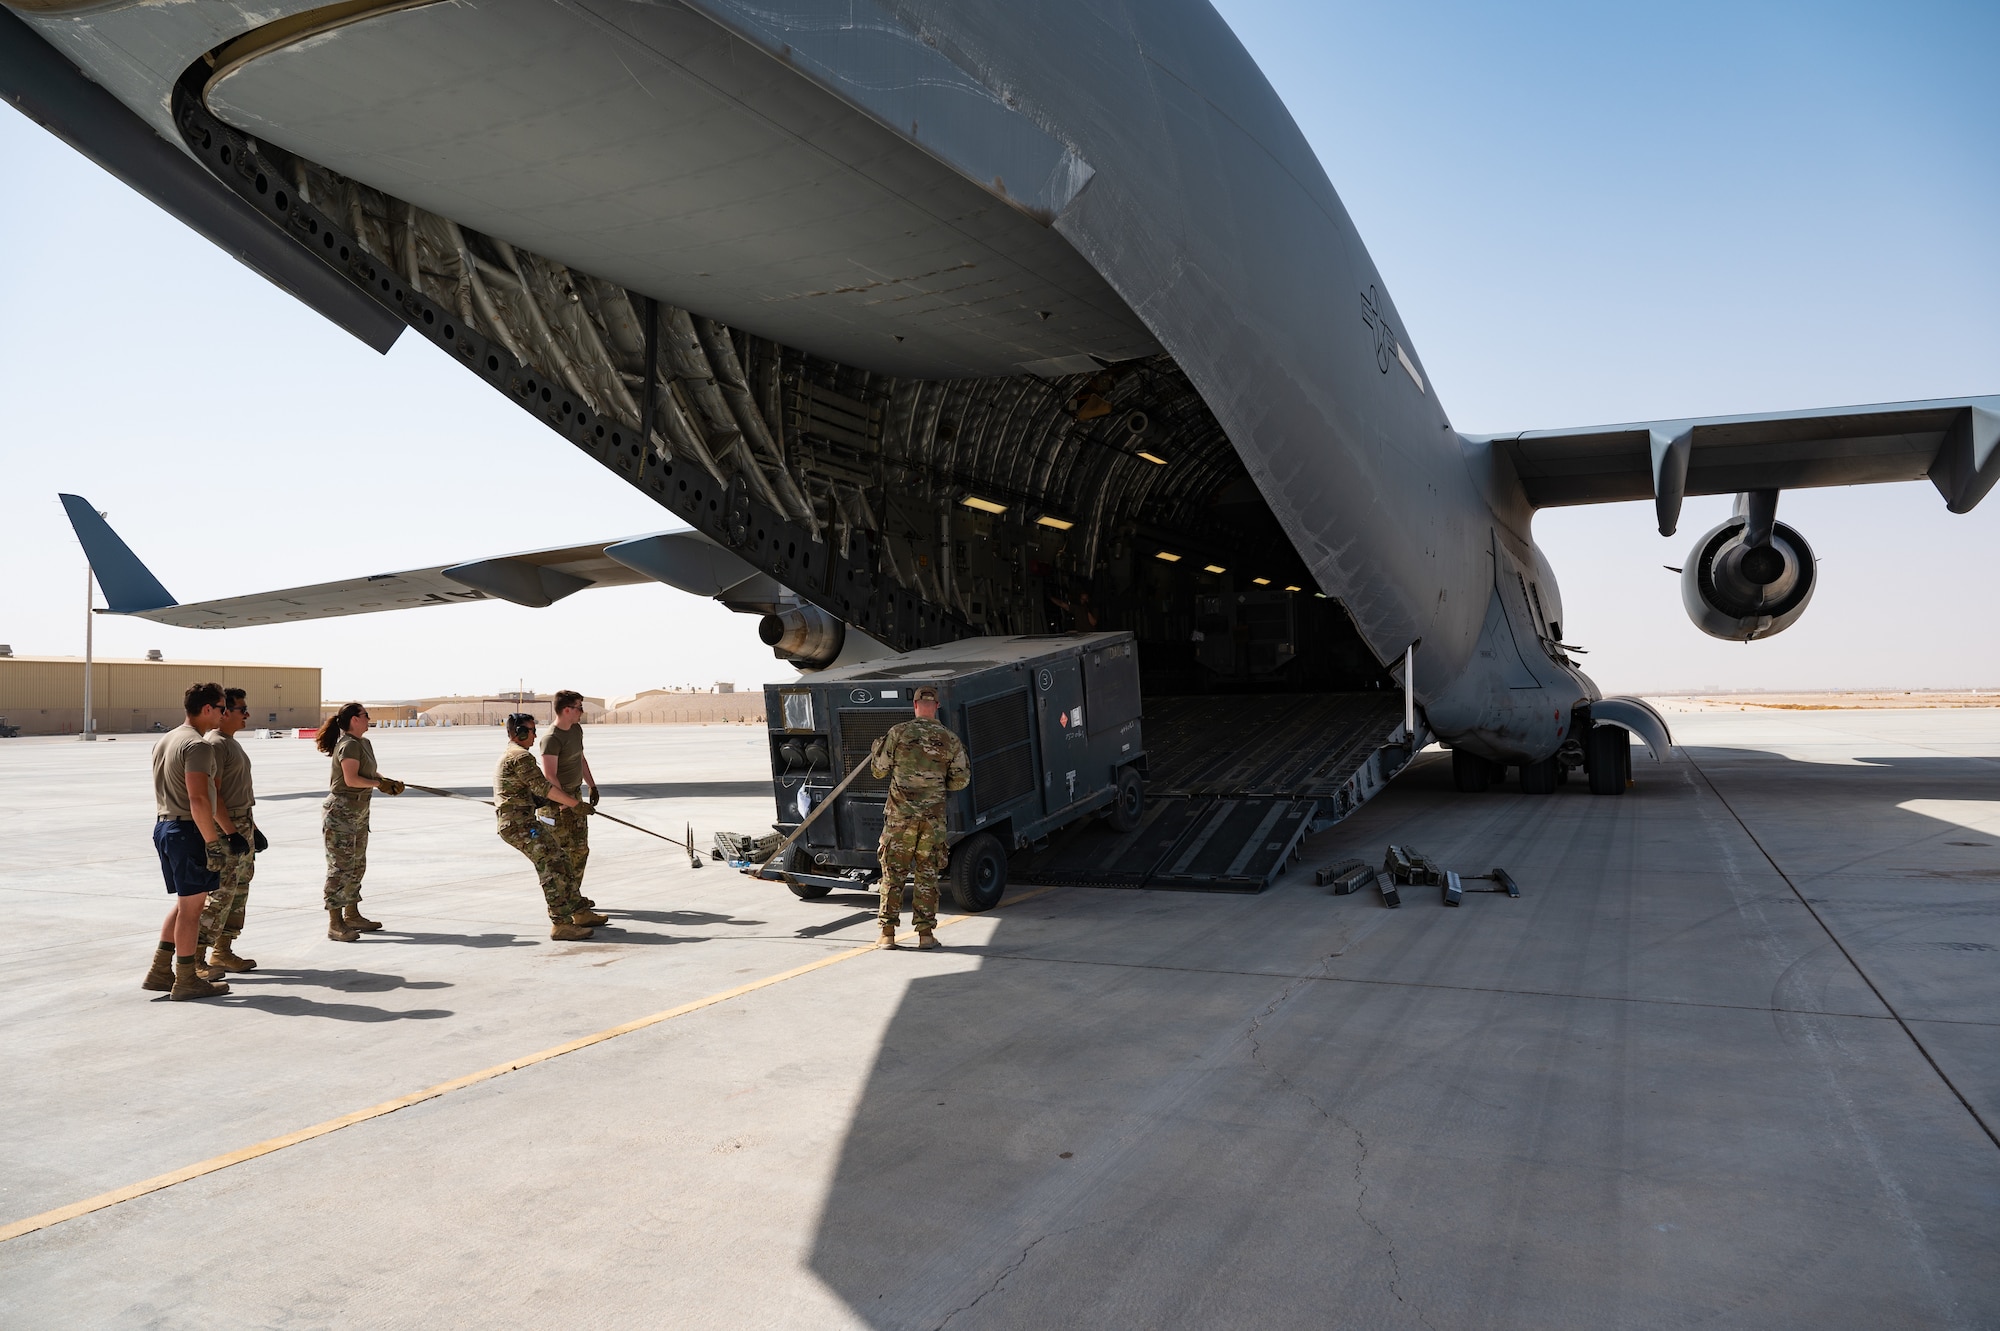 U.S. Air Force Airmen from the 379th Air Expeditionary Wing load a mobile air conditioning unit onto a U.S. Air Force C-17 Globemaster in preparation for a departure flight during exercise Accurate Test 22 at Thumrait Air Base, Oman, May 22, 2022. The Airmen pictured steered the air conditioning unit from the back as a winch inside of the aircraft pulled the cargo up the ramp and into the plane. (U.S. Air Force photo by Staff Sgt. Dana Tourtellotte)